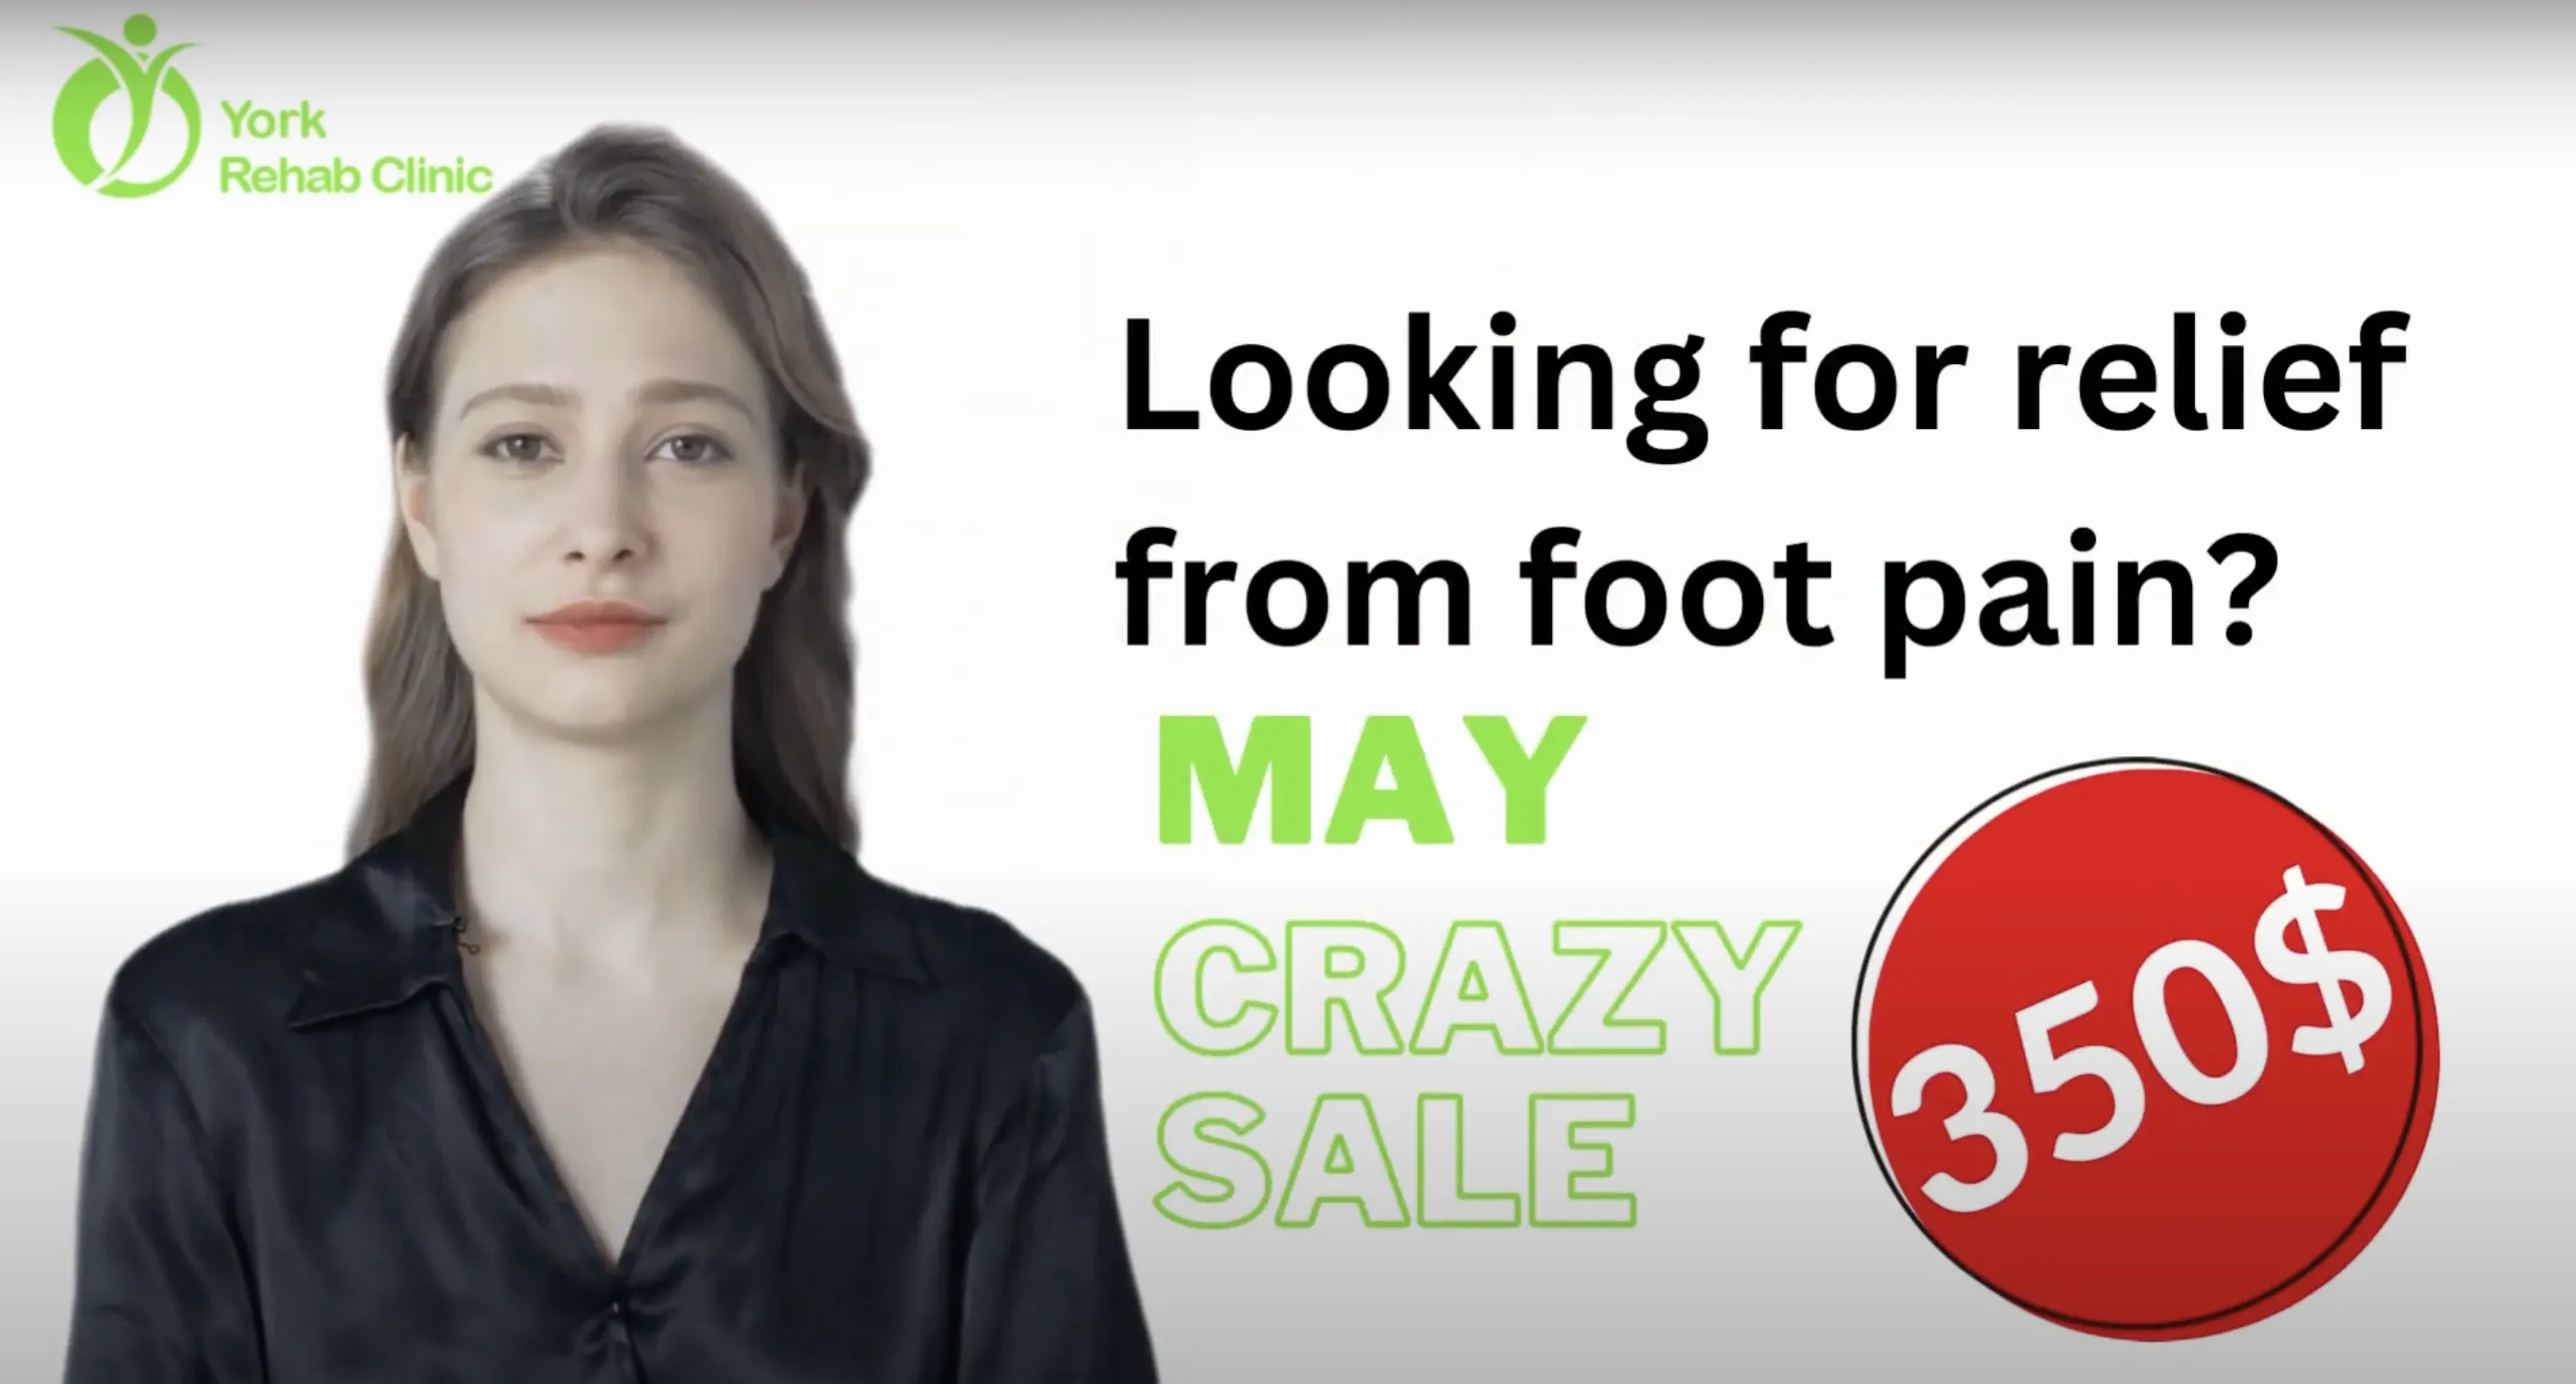 Crazy Sale Alert: Get Custom Orthotics with 3D Foot Scanning for Only $350! | York Rehab Clinic